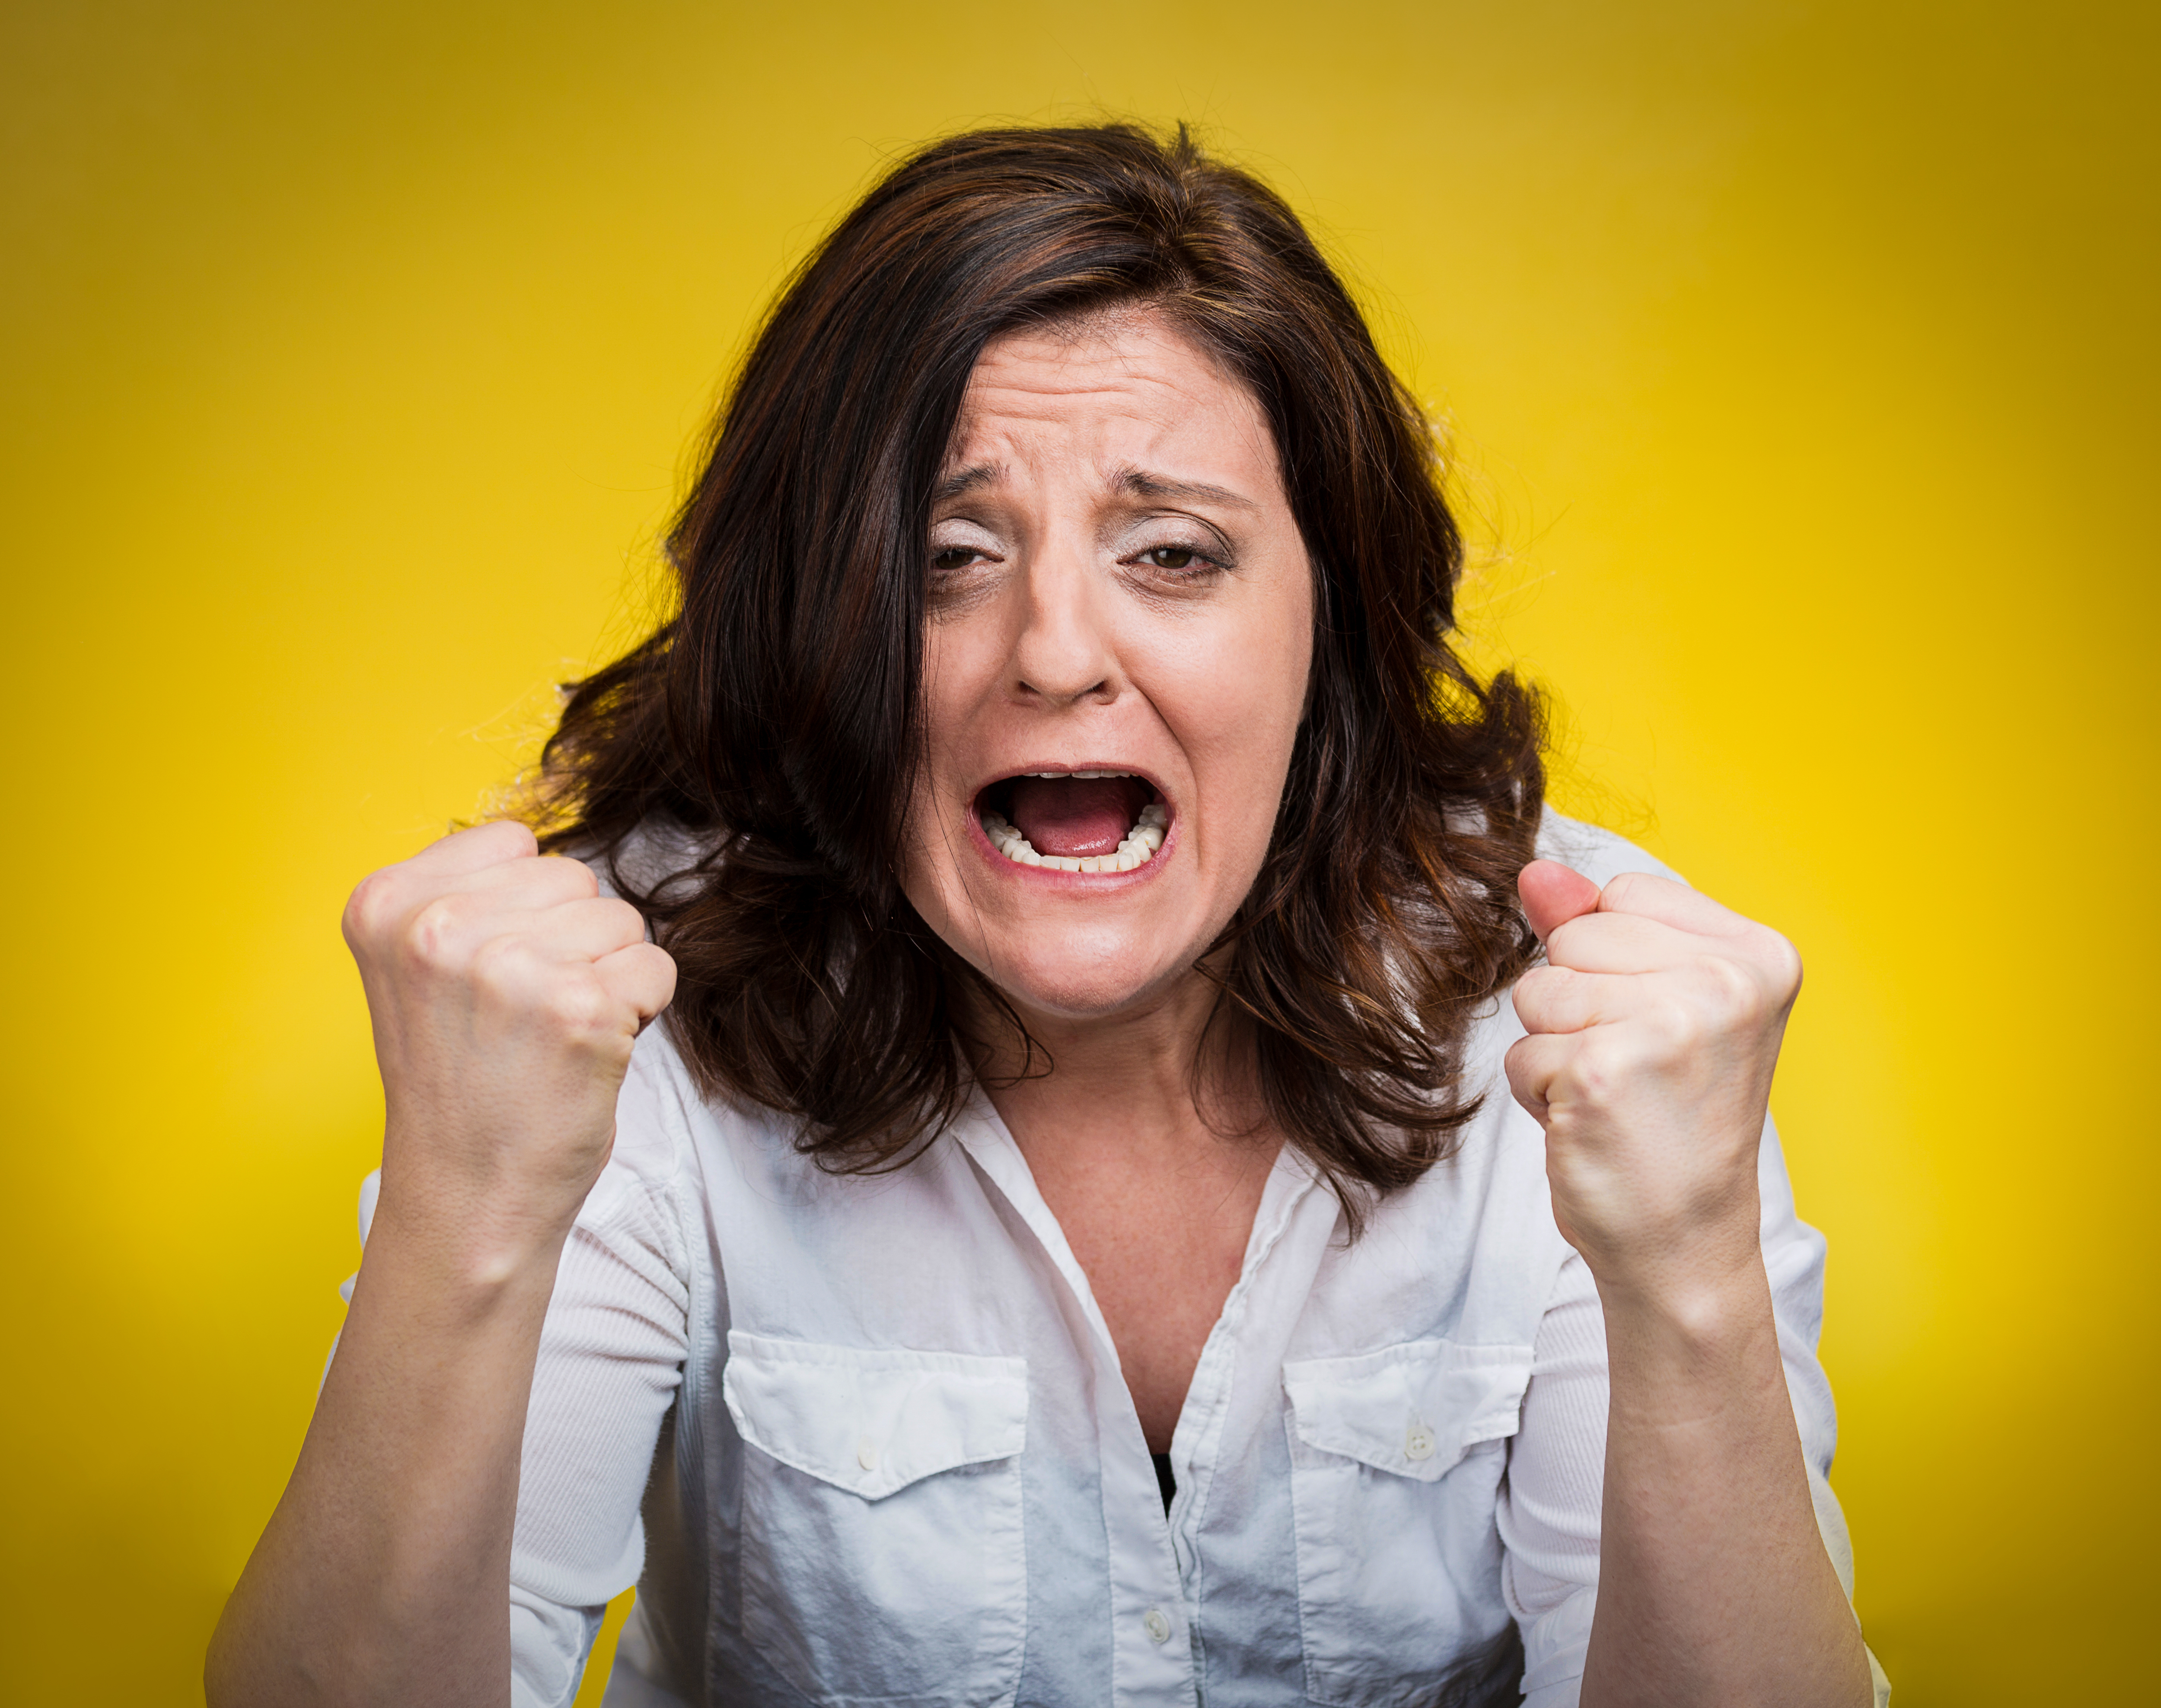 An angry middle-aged woman screaming | Source: Shutterstock